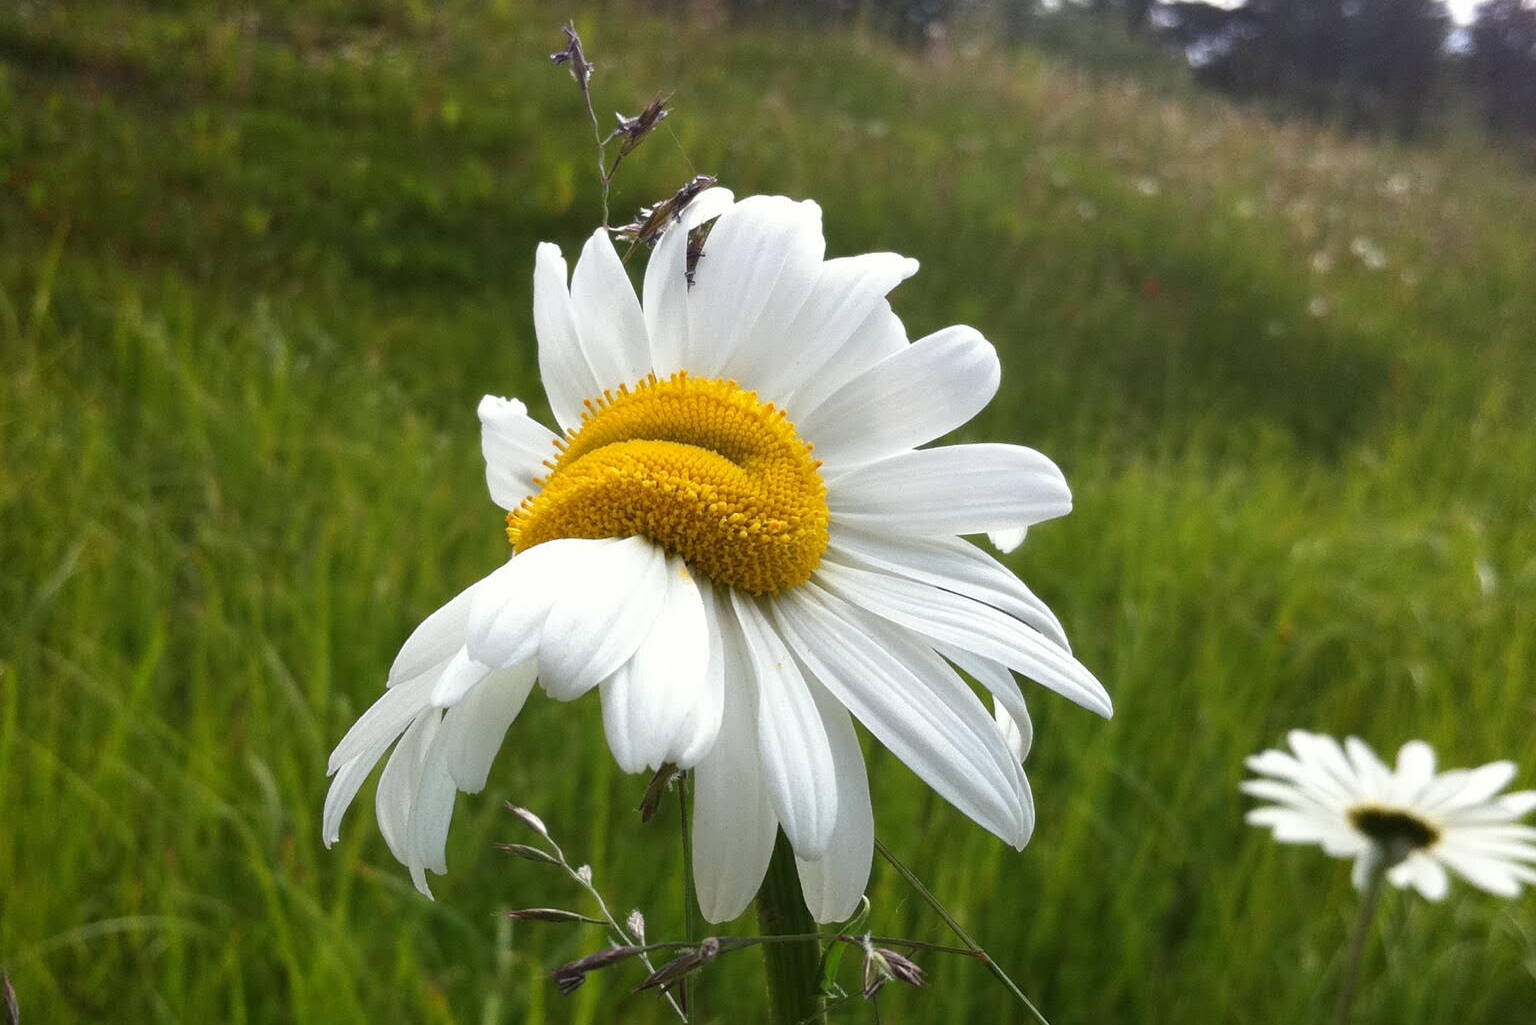 A roadside daisy displays a fasciated center. (Photo by Deana Barajas)